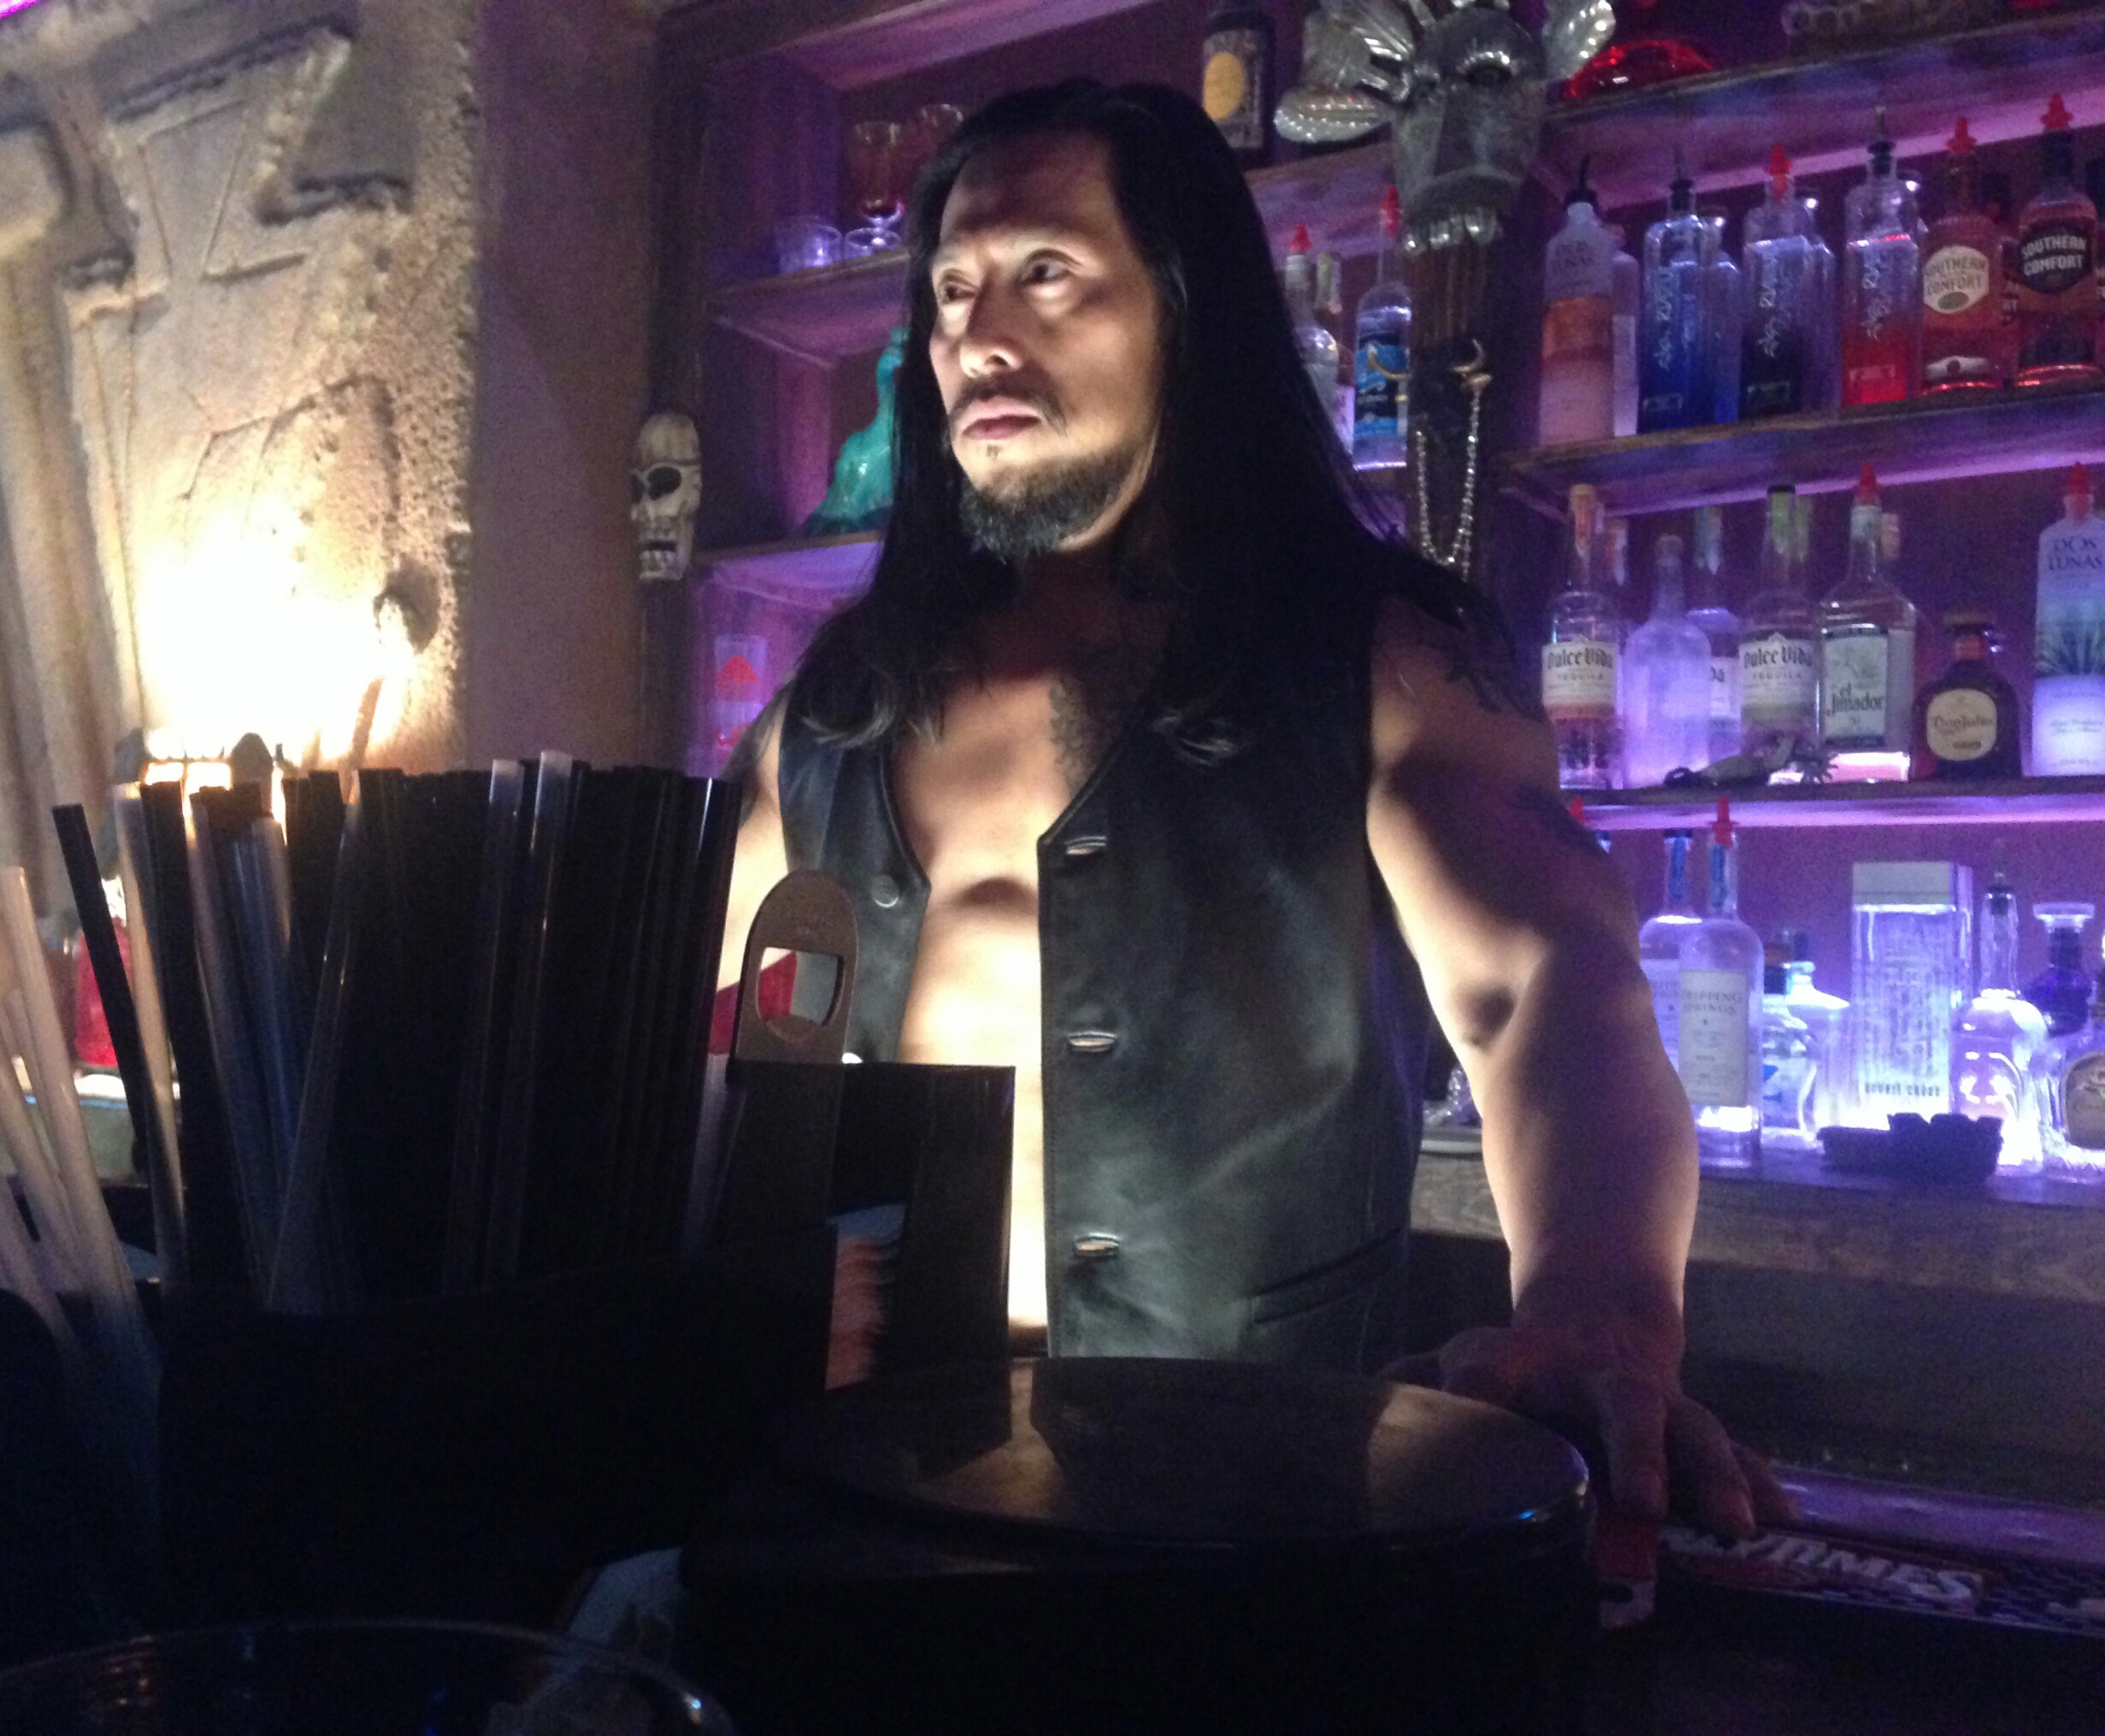 Sam Medina as The Iconic Role of Razor Charlie on From Dusk Til Dawn